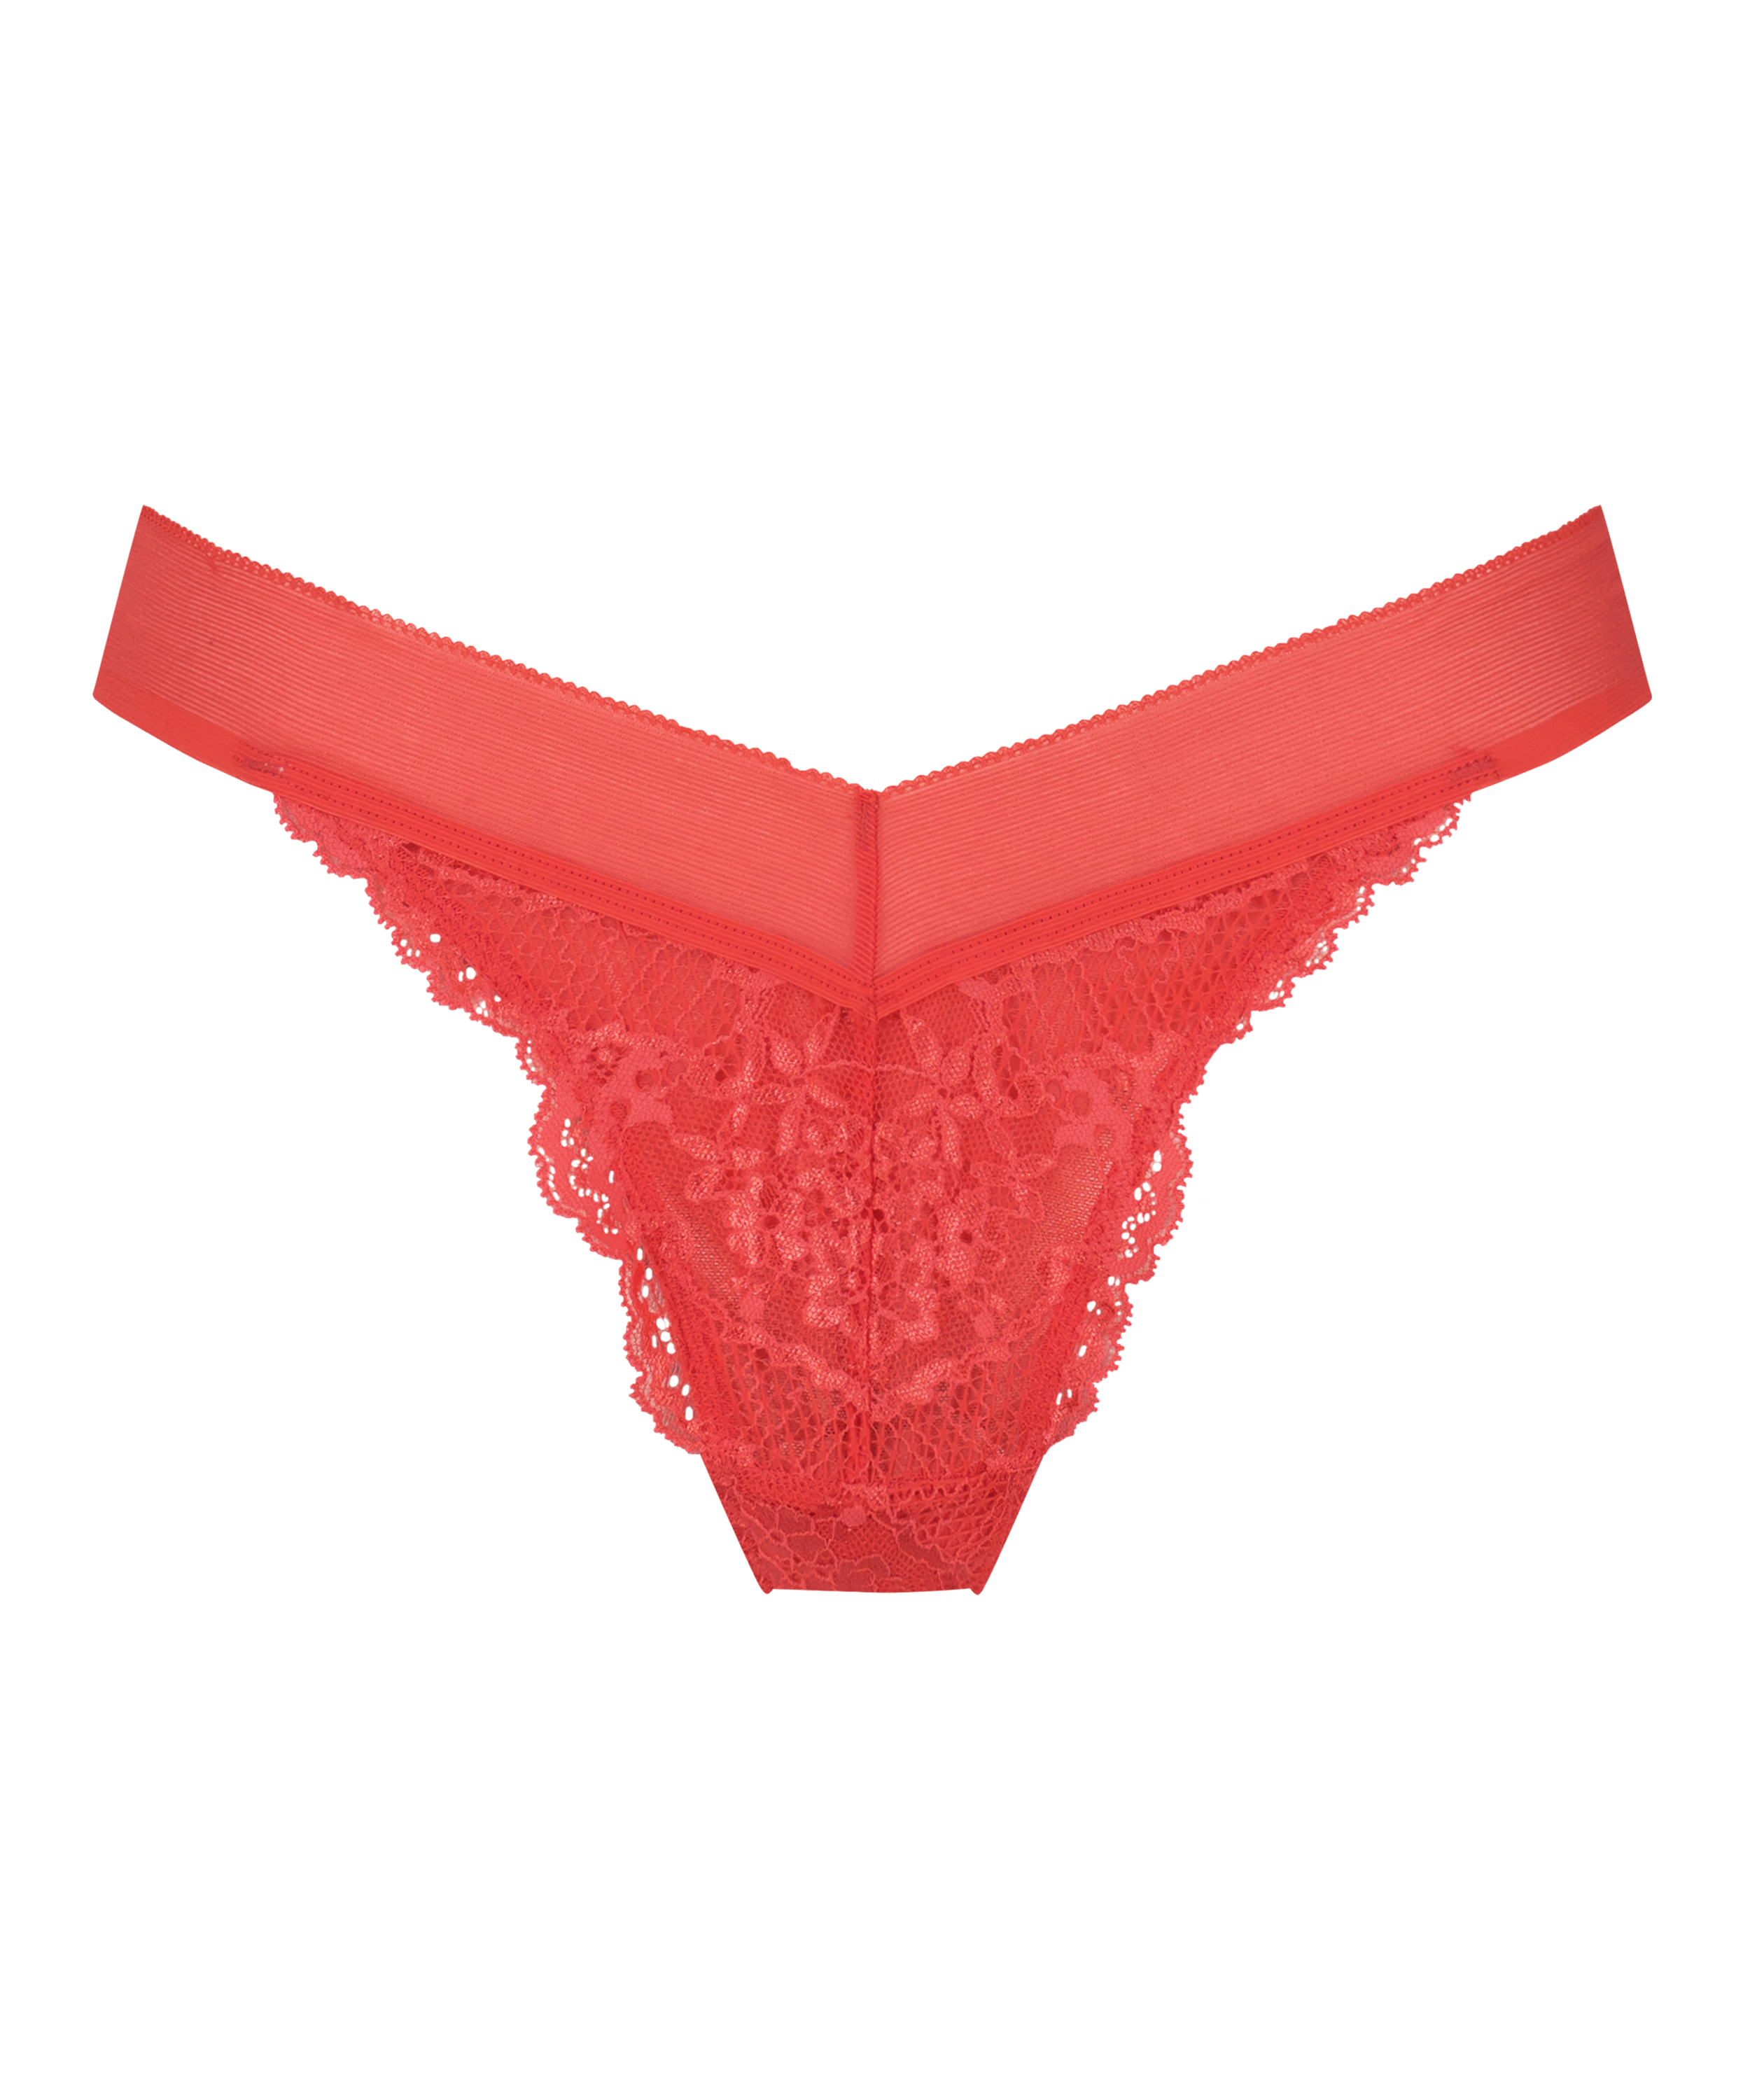 Chione thong, Red, main